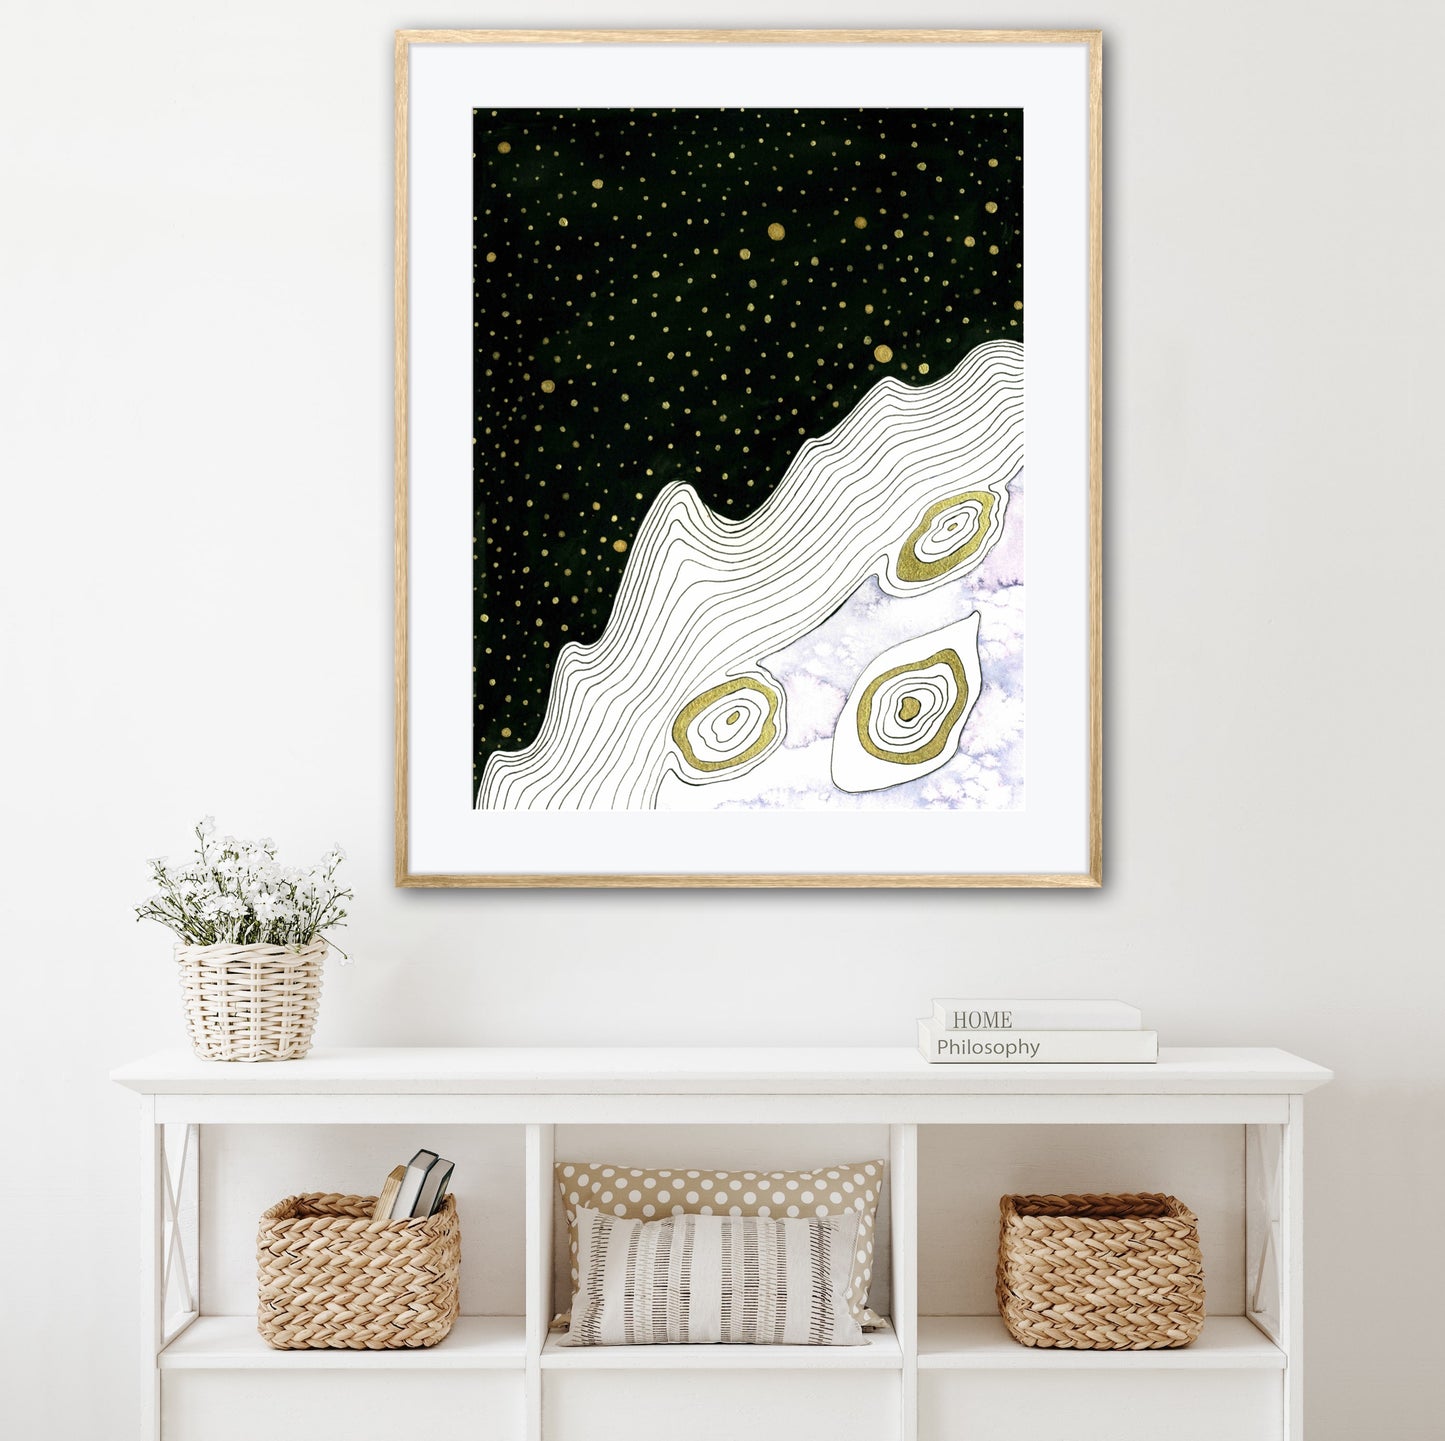 Interstellar Abstract Embellished Fine Art Print - Signed By The Artist